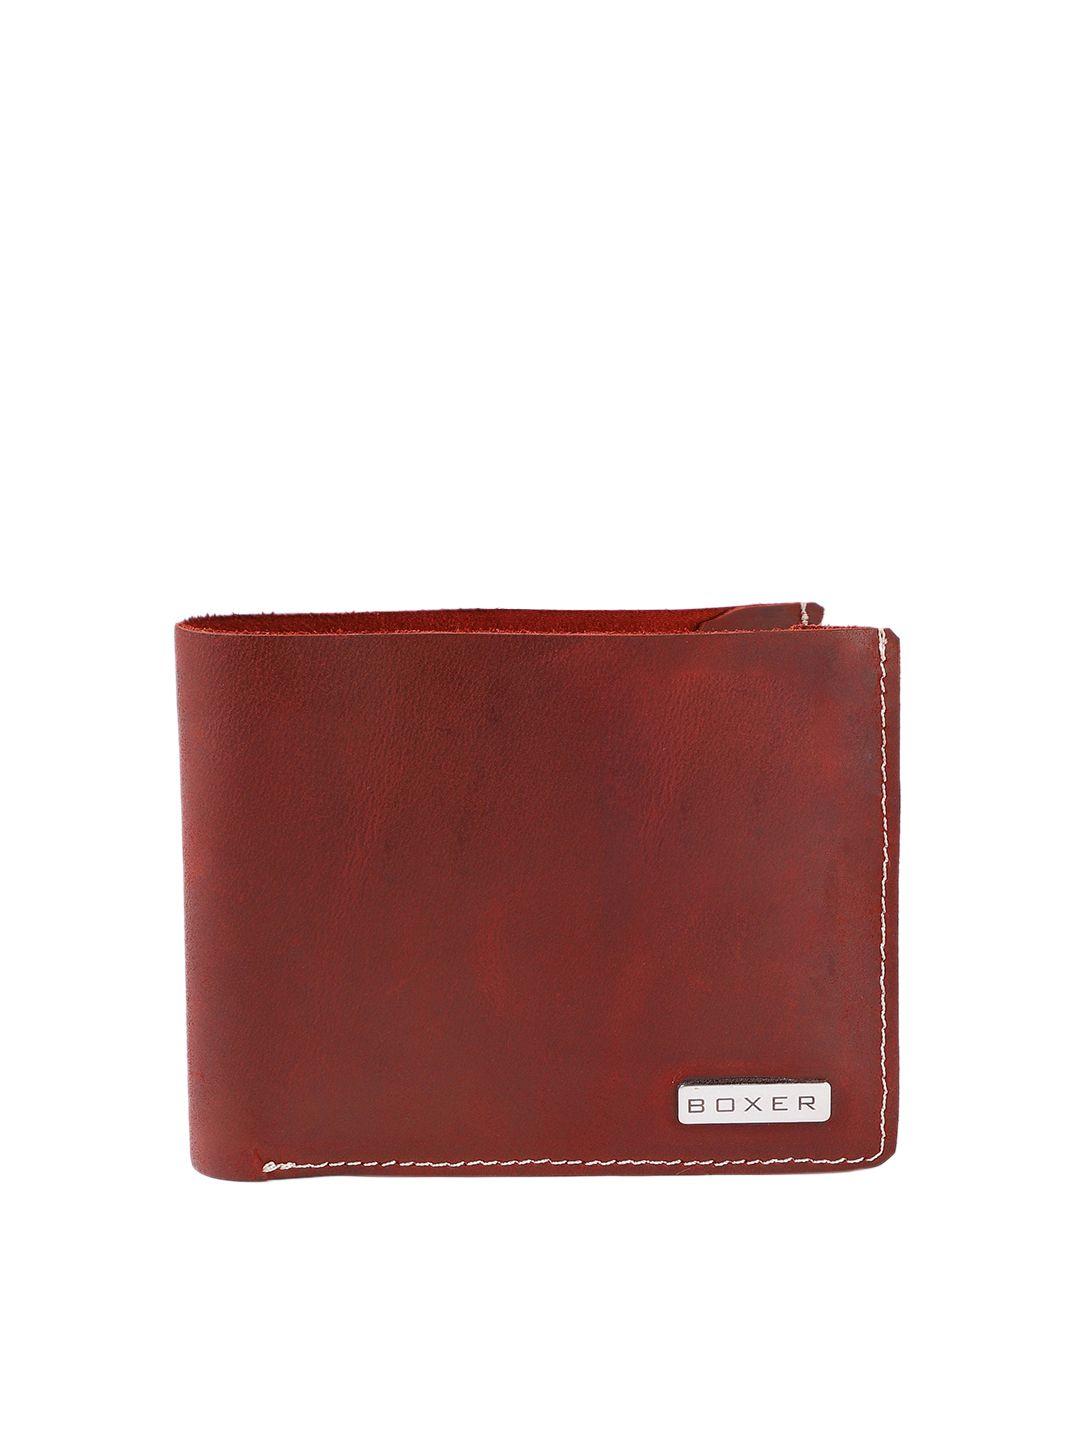 boxer men red solid leather two fold wallet bw6